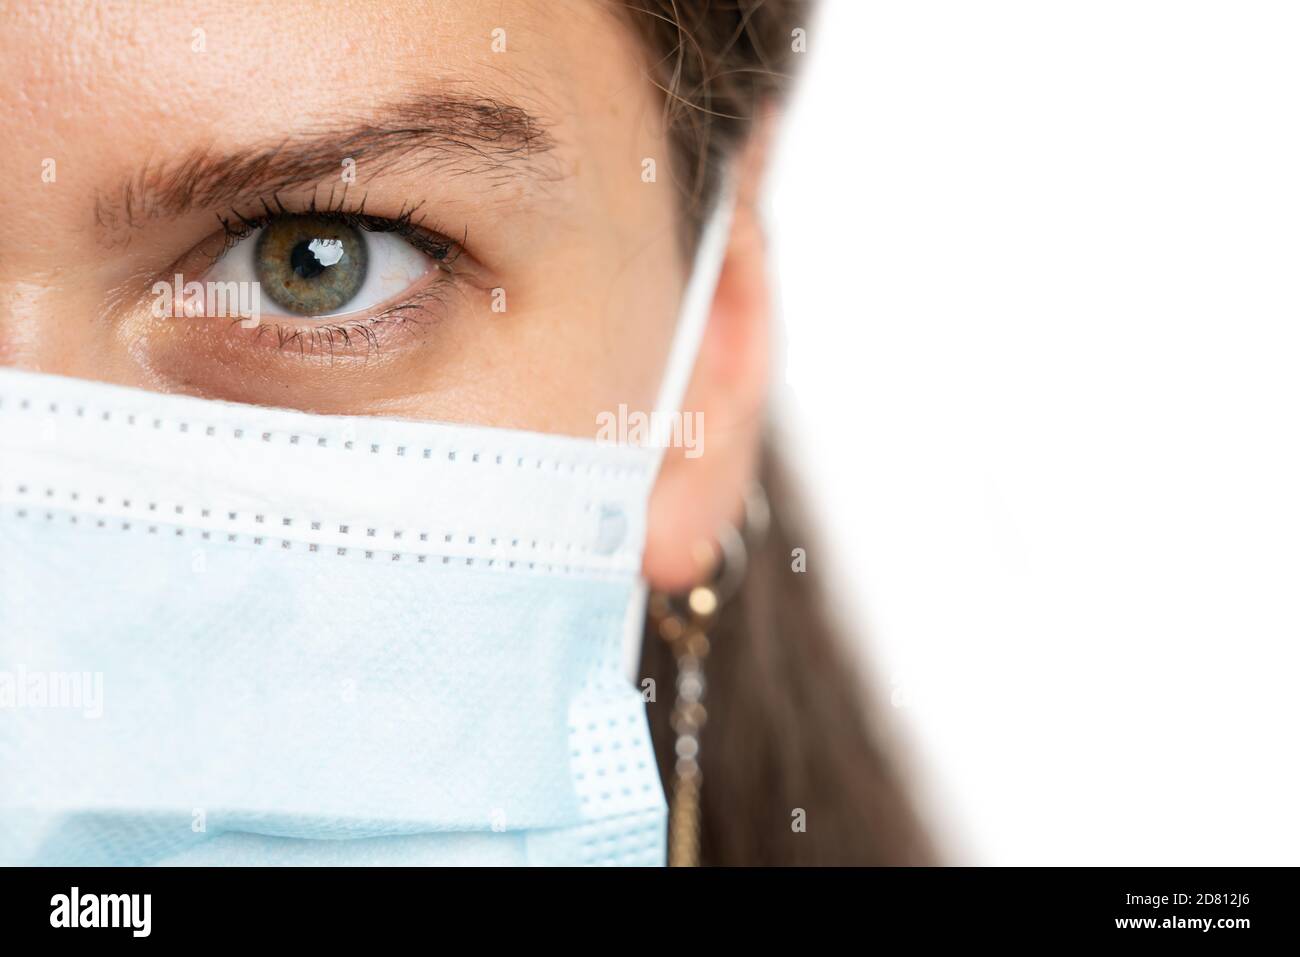 Half face close-up of adult woman model wearing disposable surgical or medical protection mask to prevent sars covid influenza virus infection in pand Stock Photo